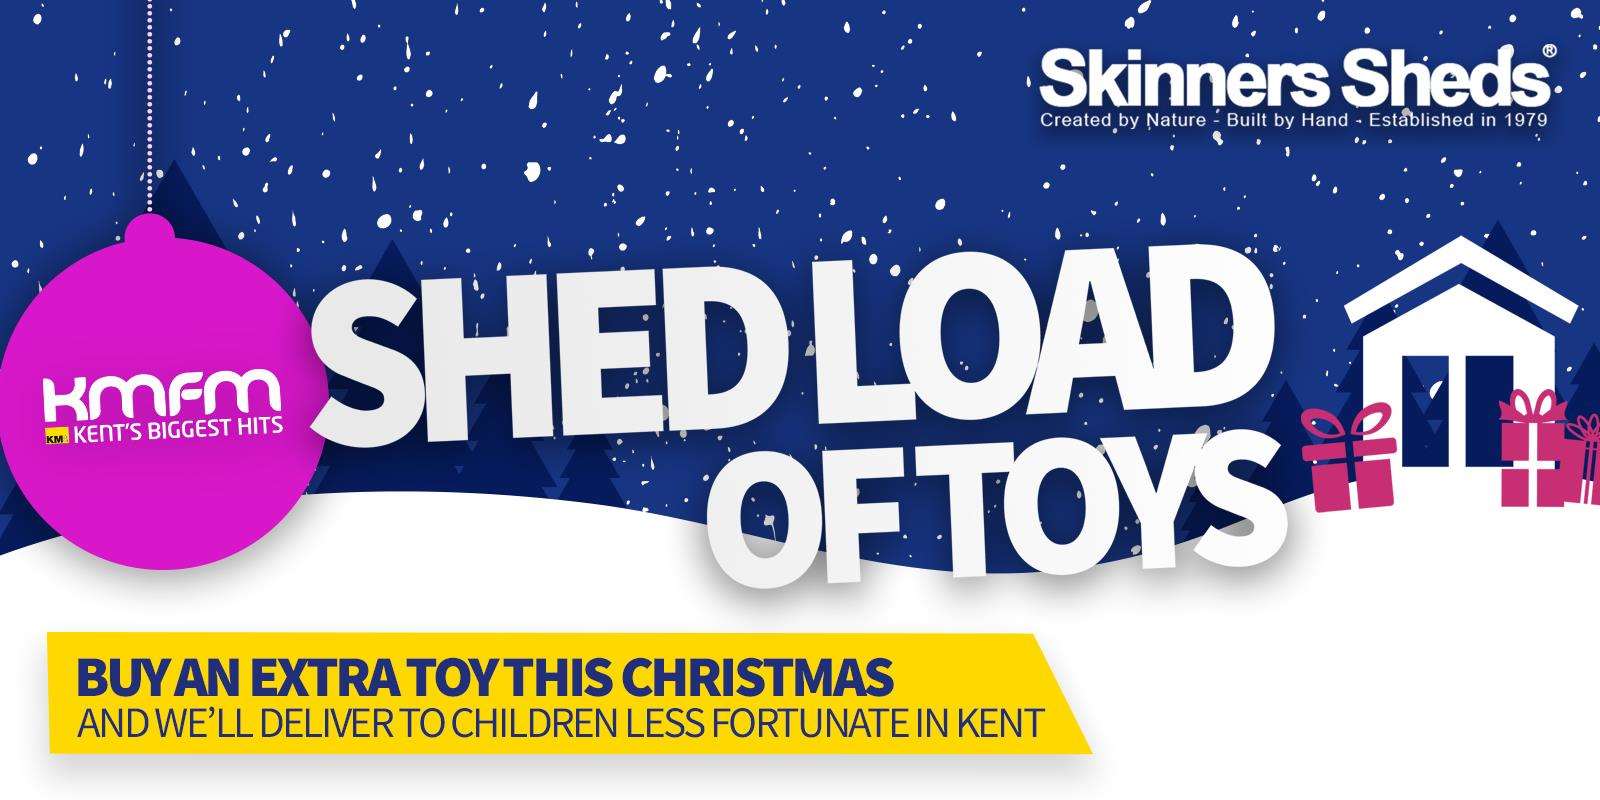 kmfm's Christmas toy appeal